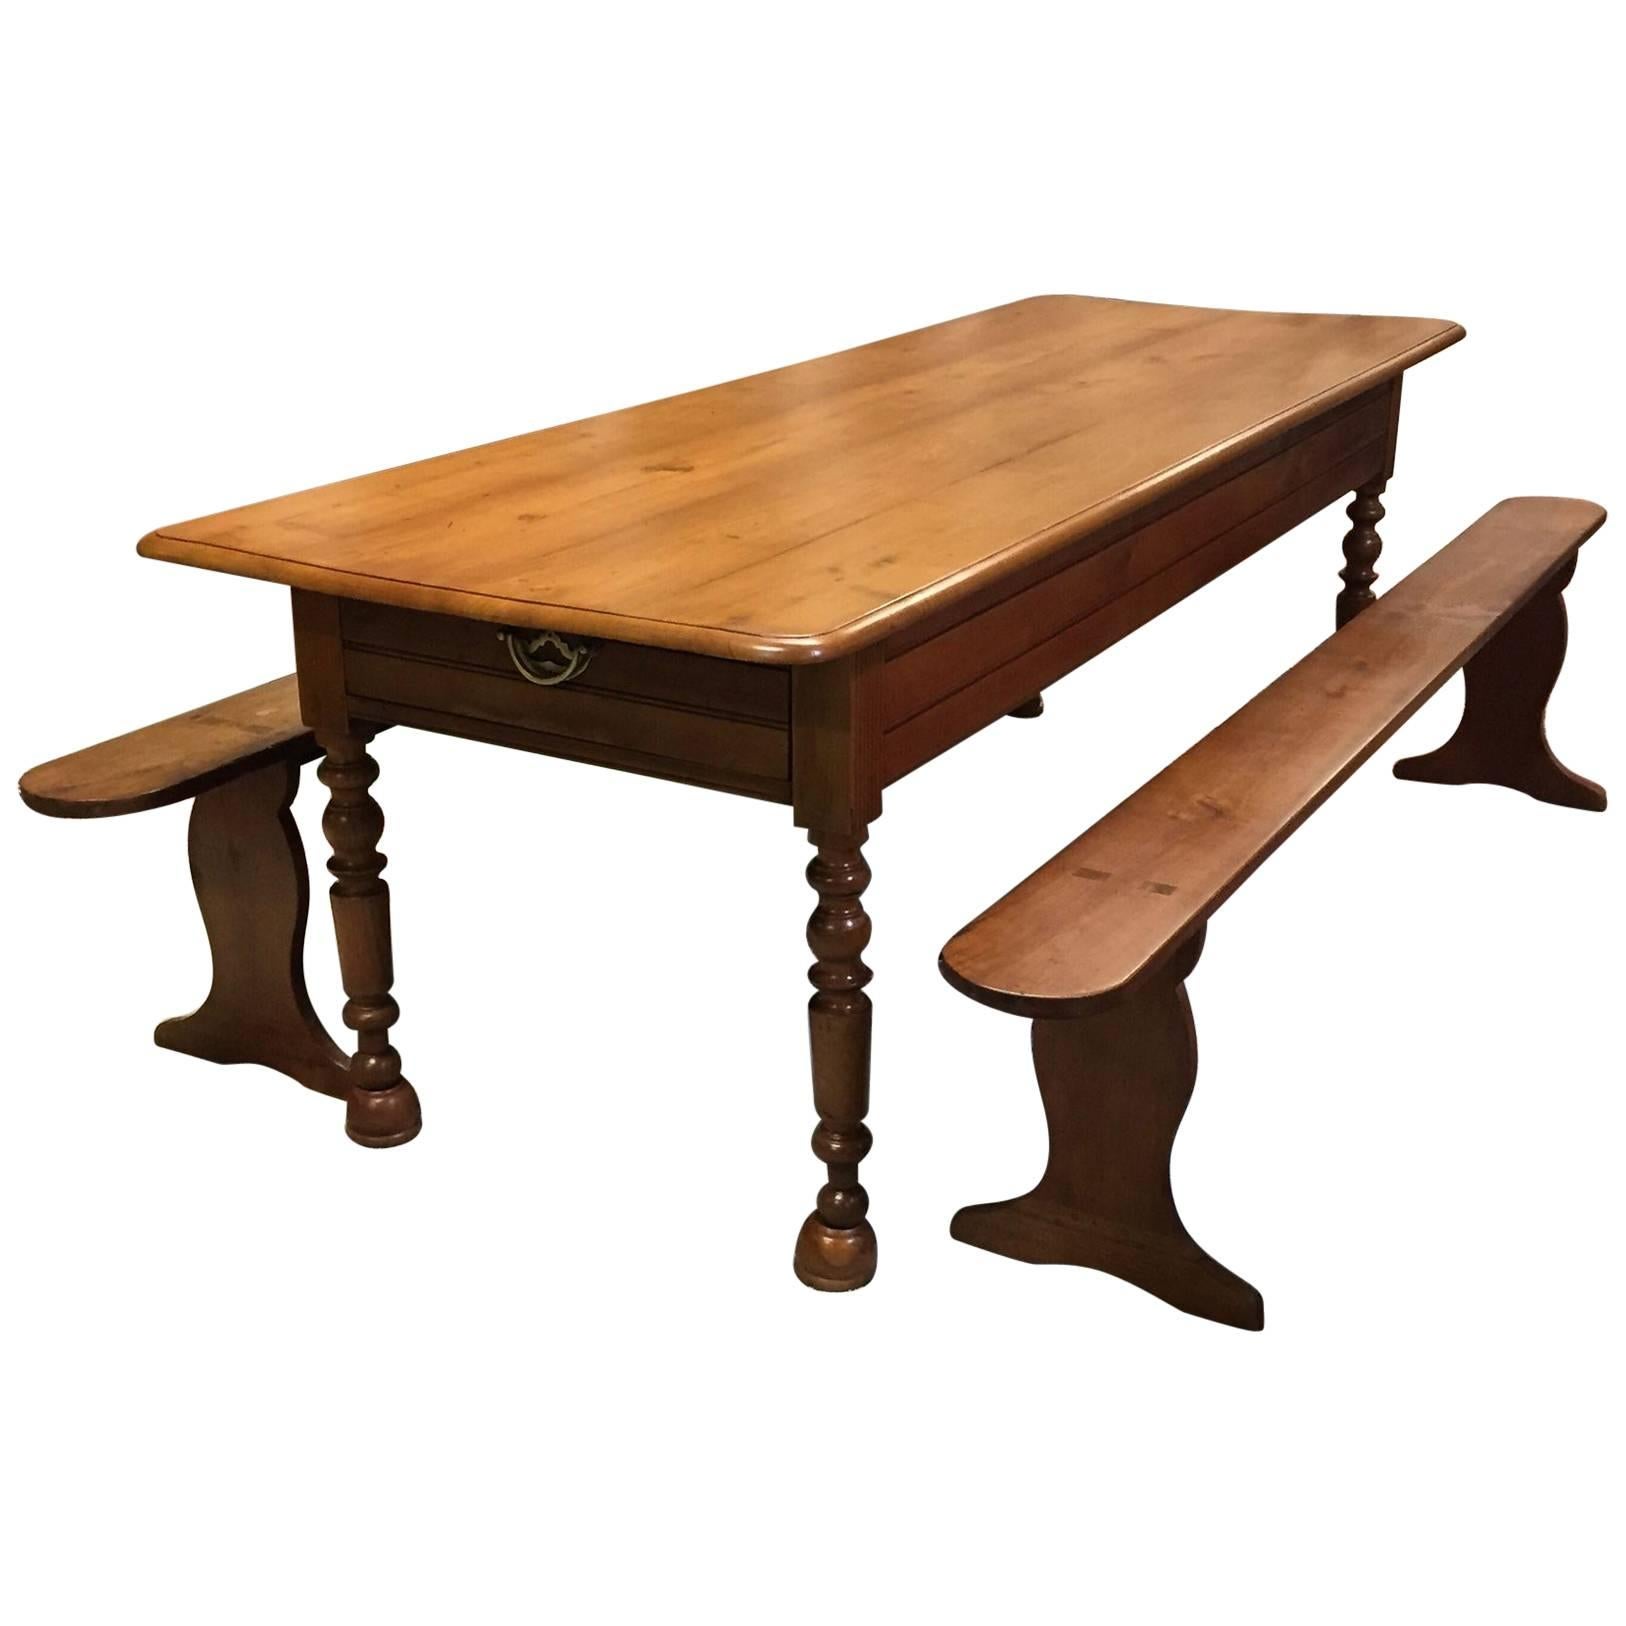 19th Century Fruitwood Farm Table with Benches